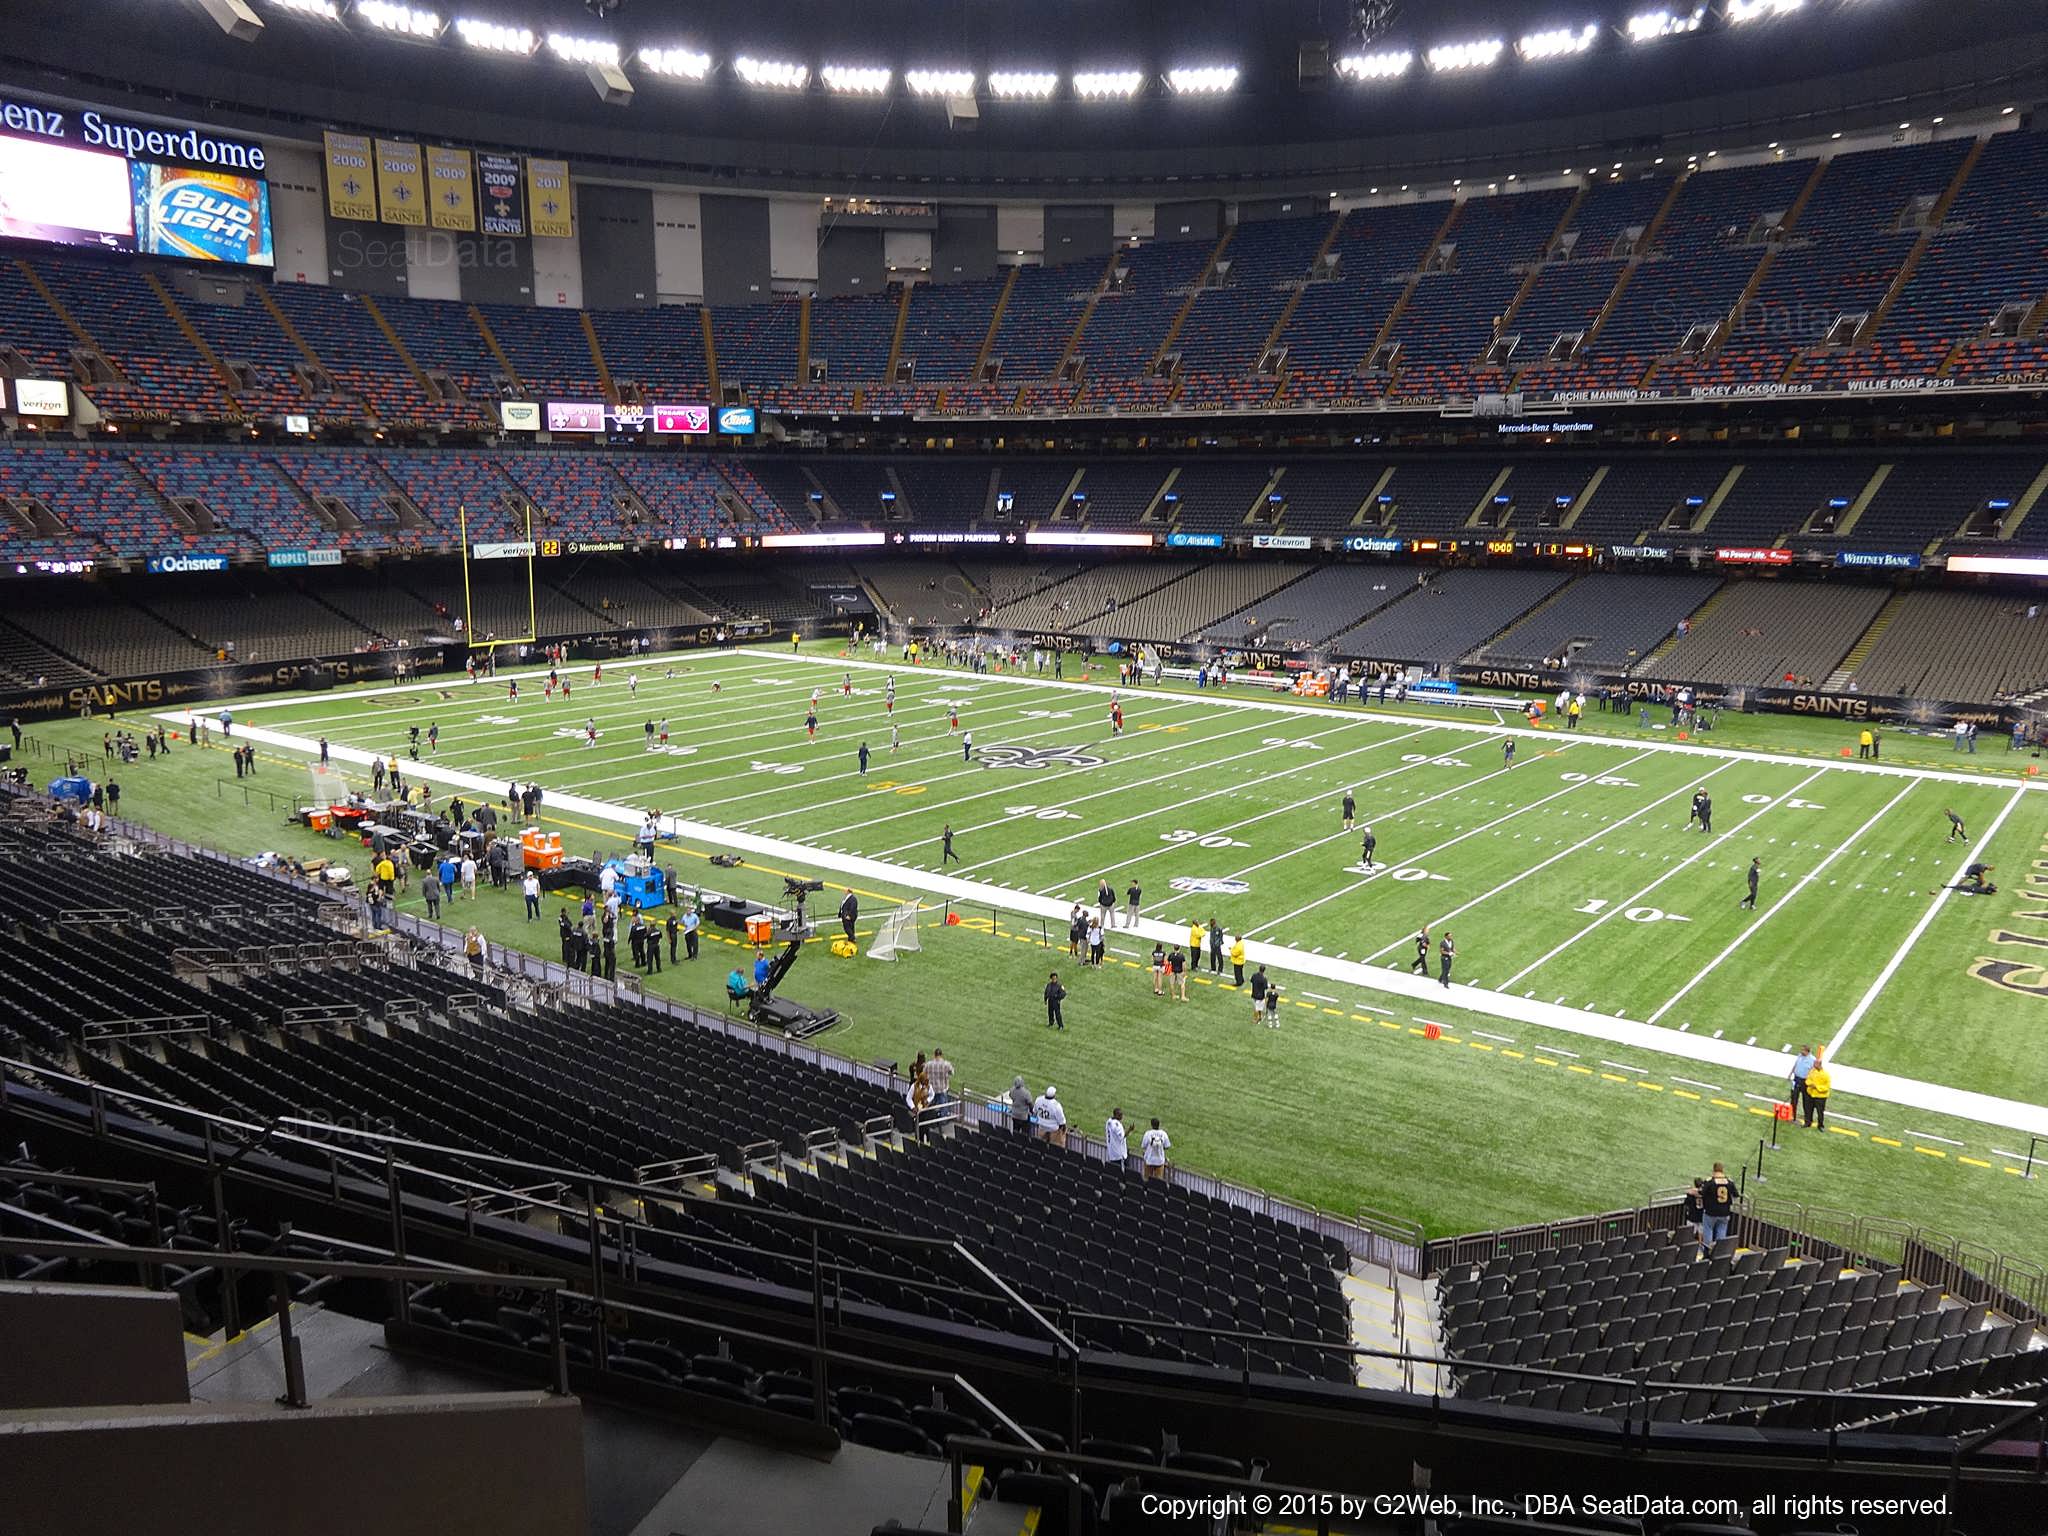 Seat view from section 331 at the Mercedes-Benz Superdome, home of the New Orleans Saints